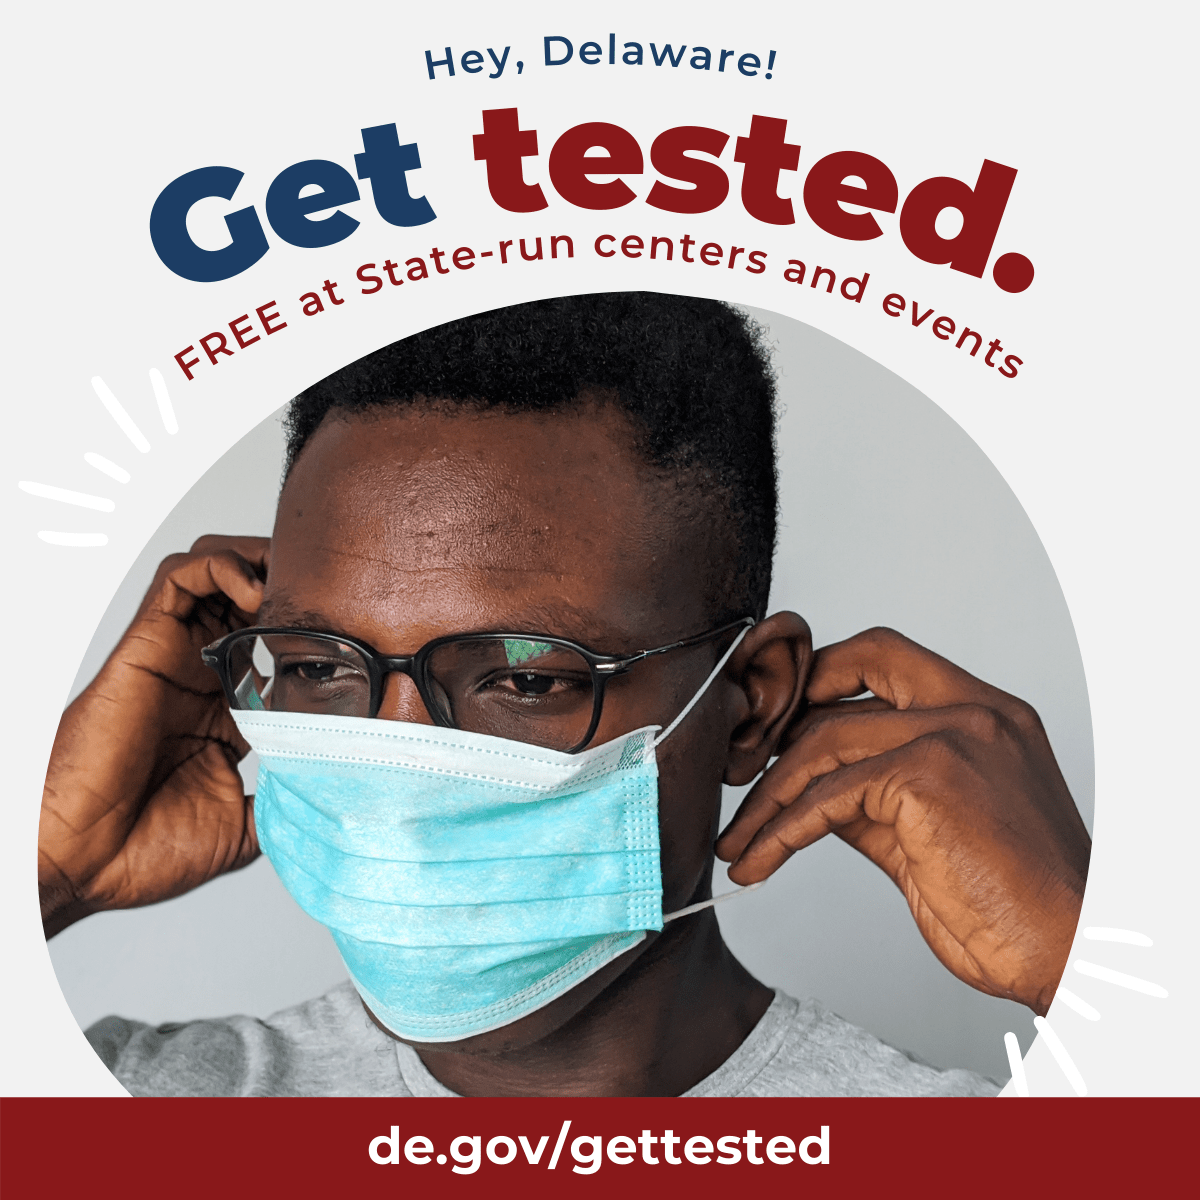 How to get tested for free in Delaware.